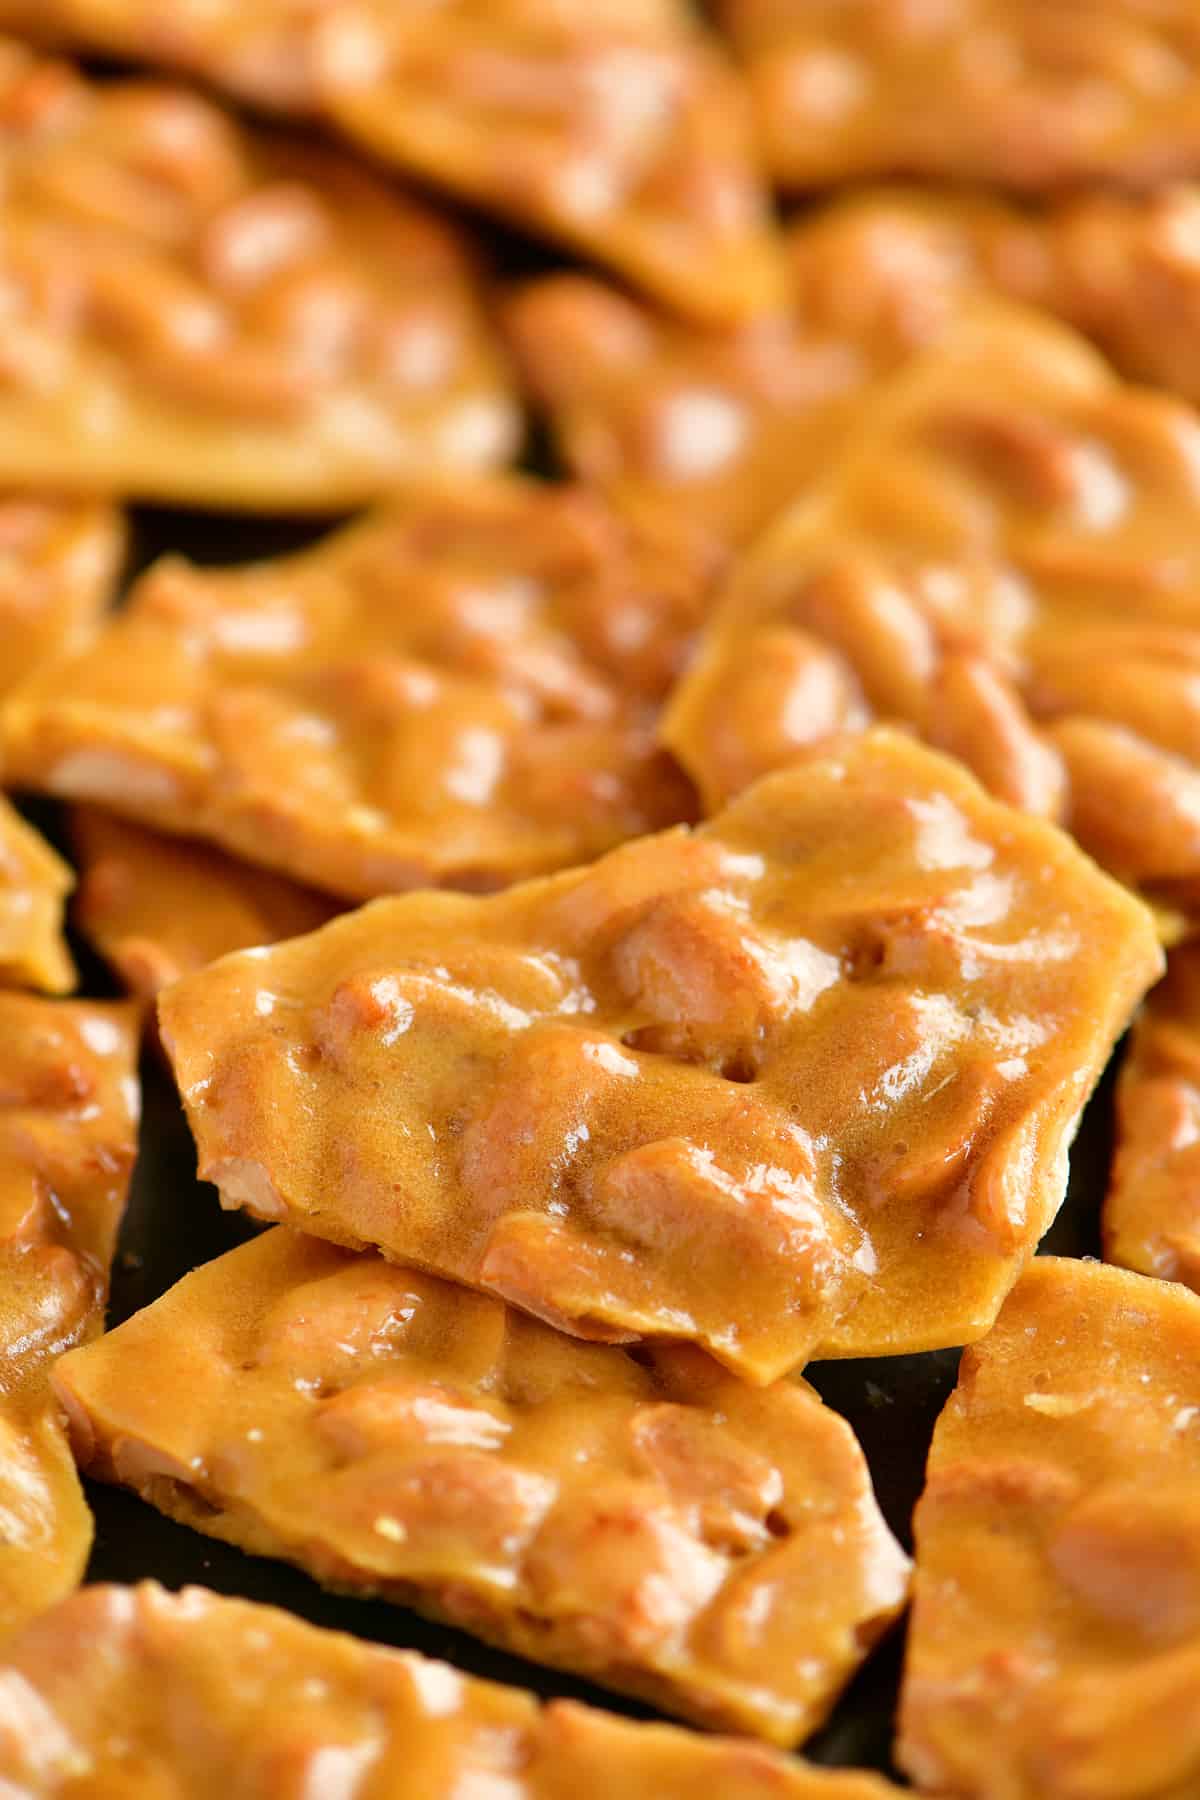 a close-up photo of the peanut brittle